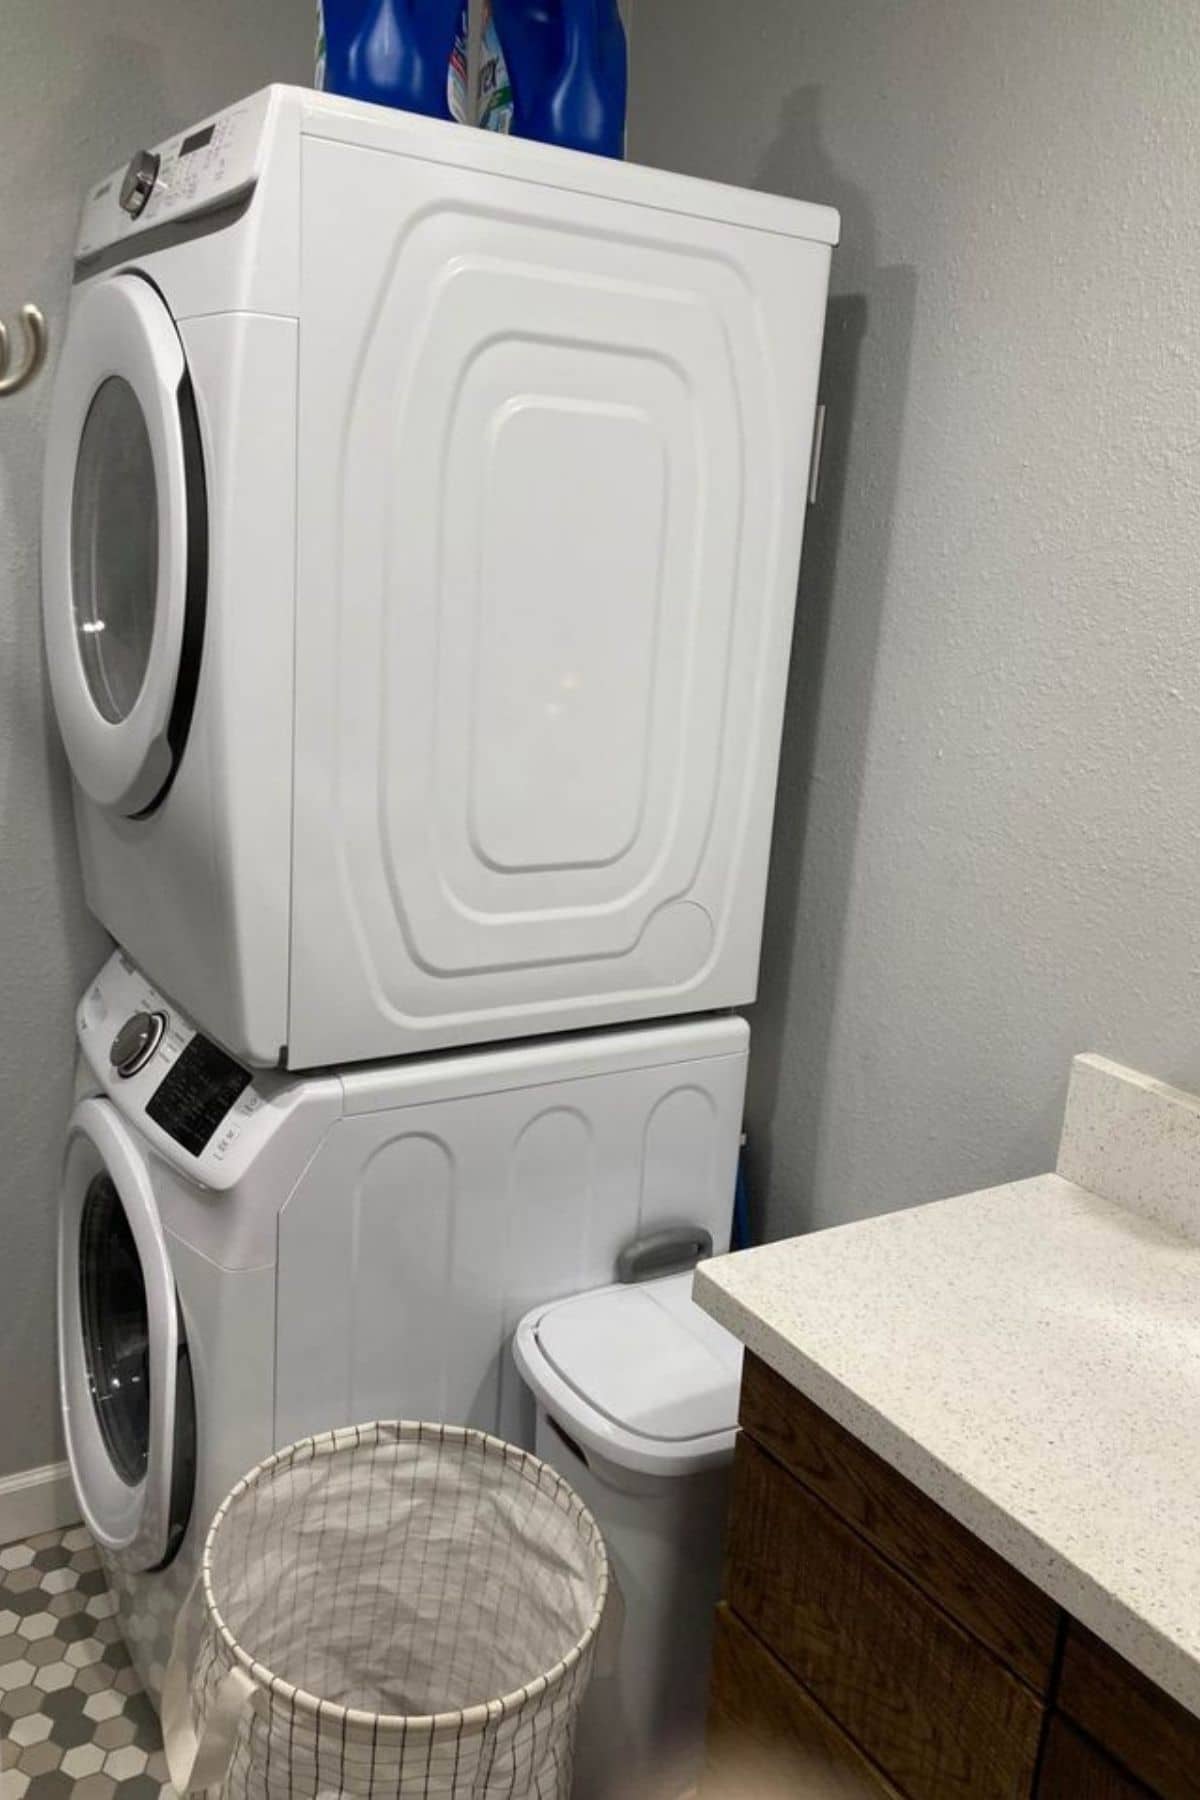 Stackingh washer and dryer next to sink